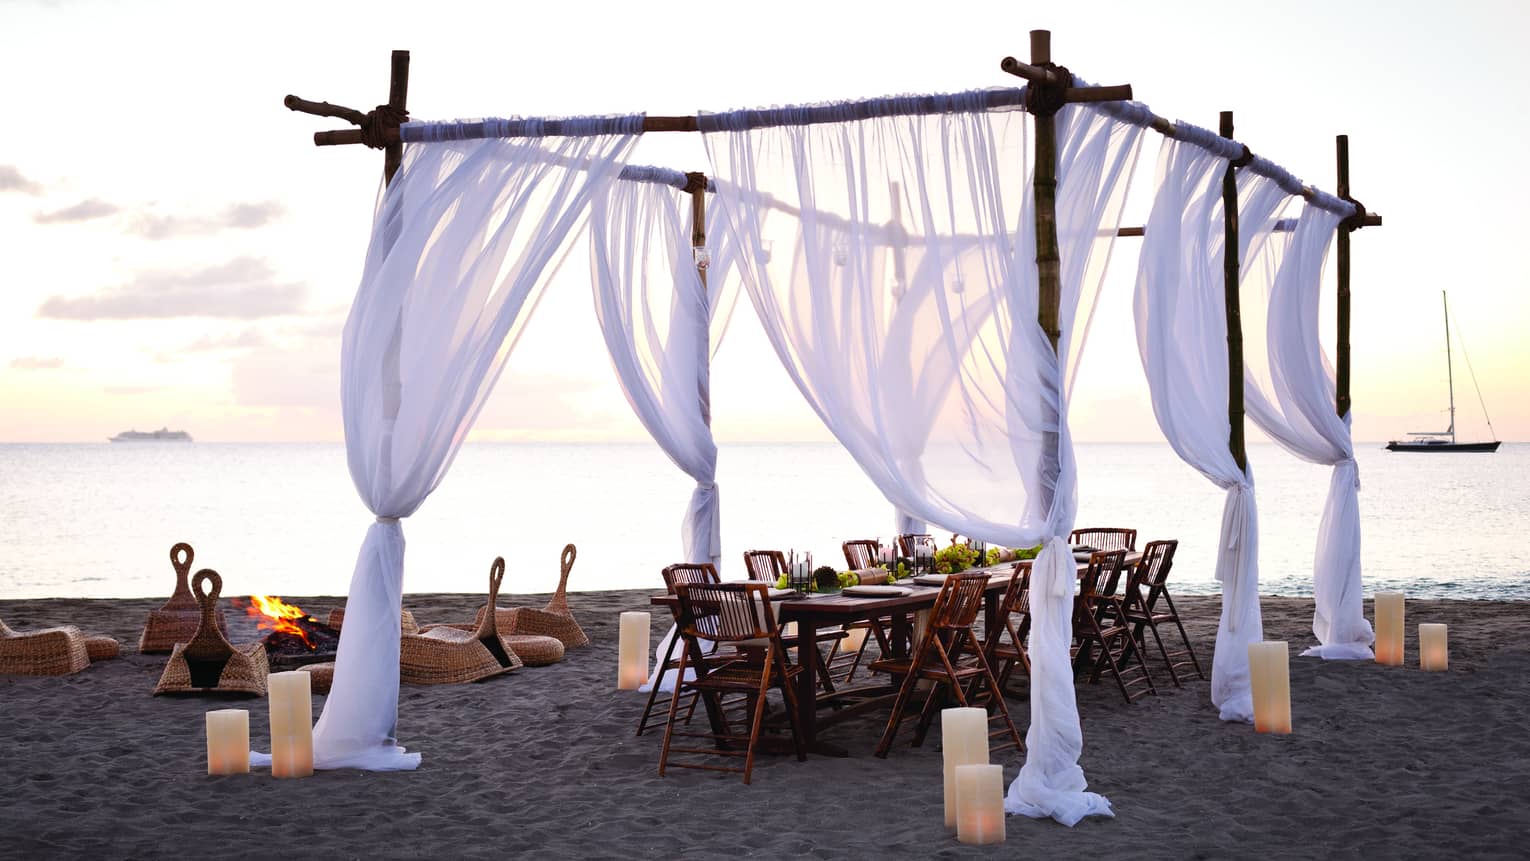 Sheer white curtains draped across wood posts around dining table on beach at sunset